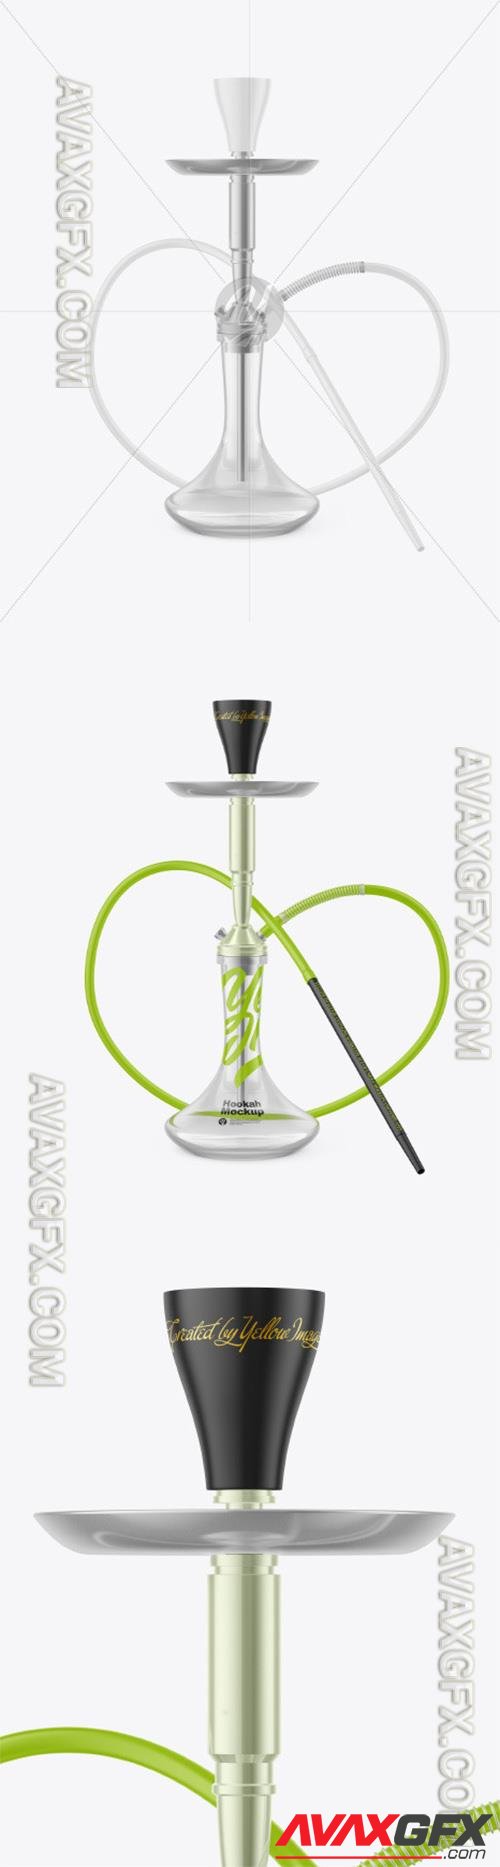 Hookah with Clear Glass Flask Mockup 89293 TIF